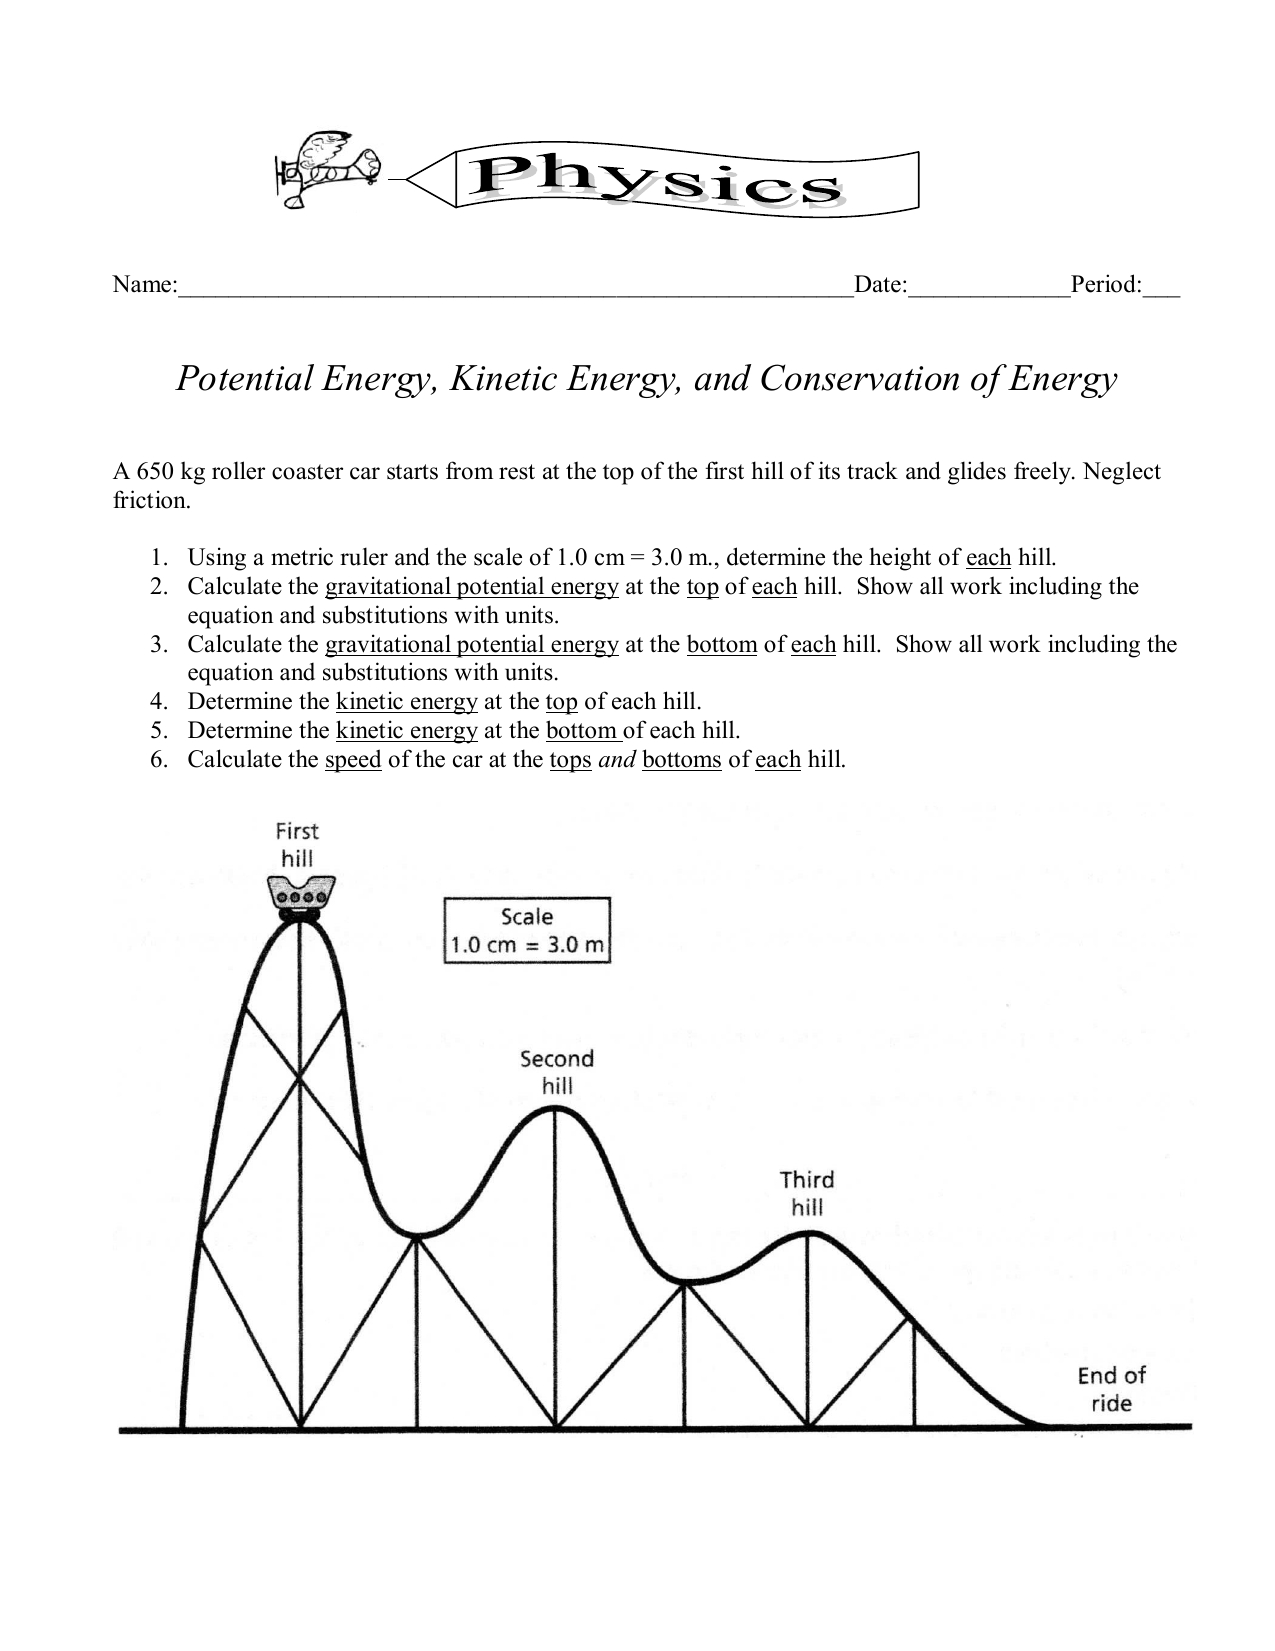 Potential And Kinetic Energy Roller Coaster Worksheet Db excel